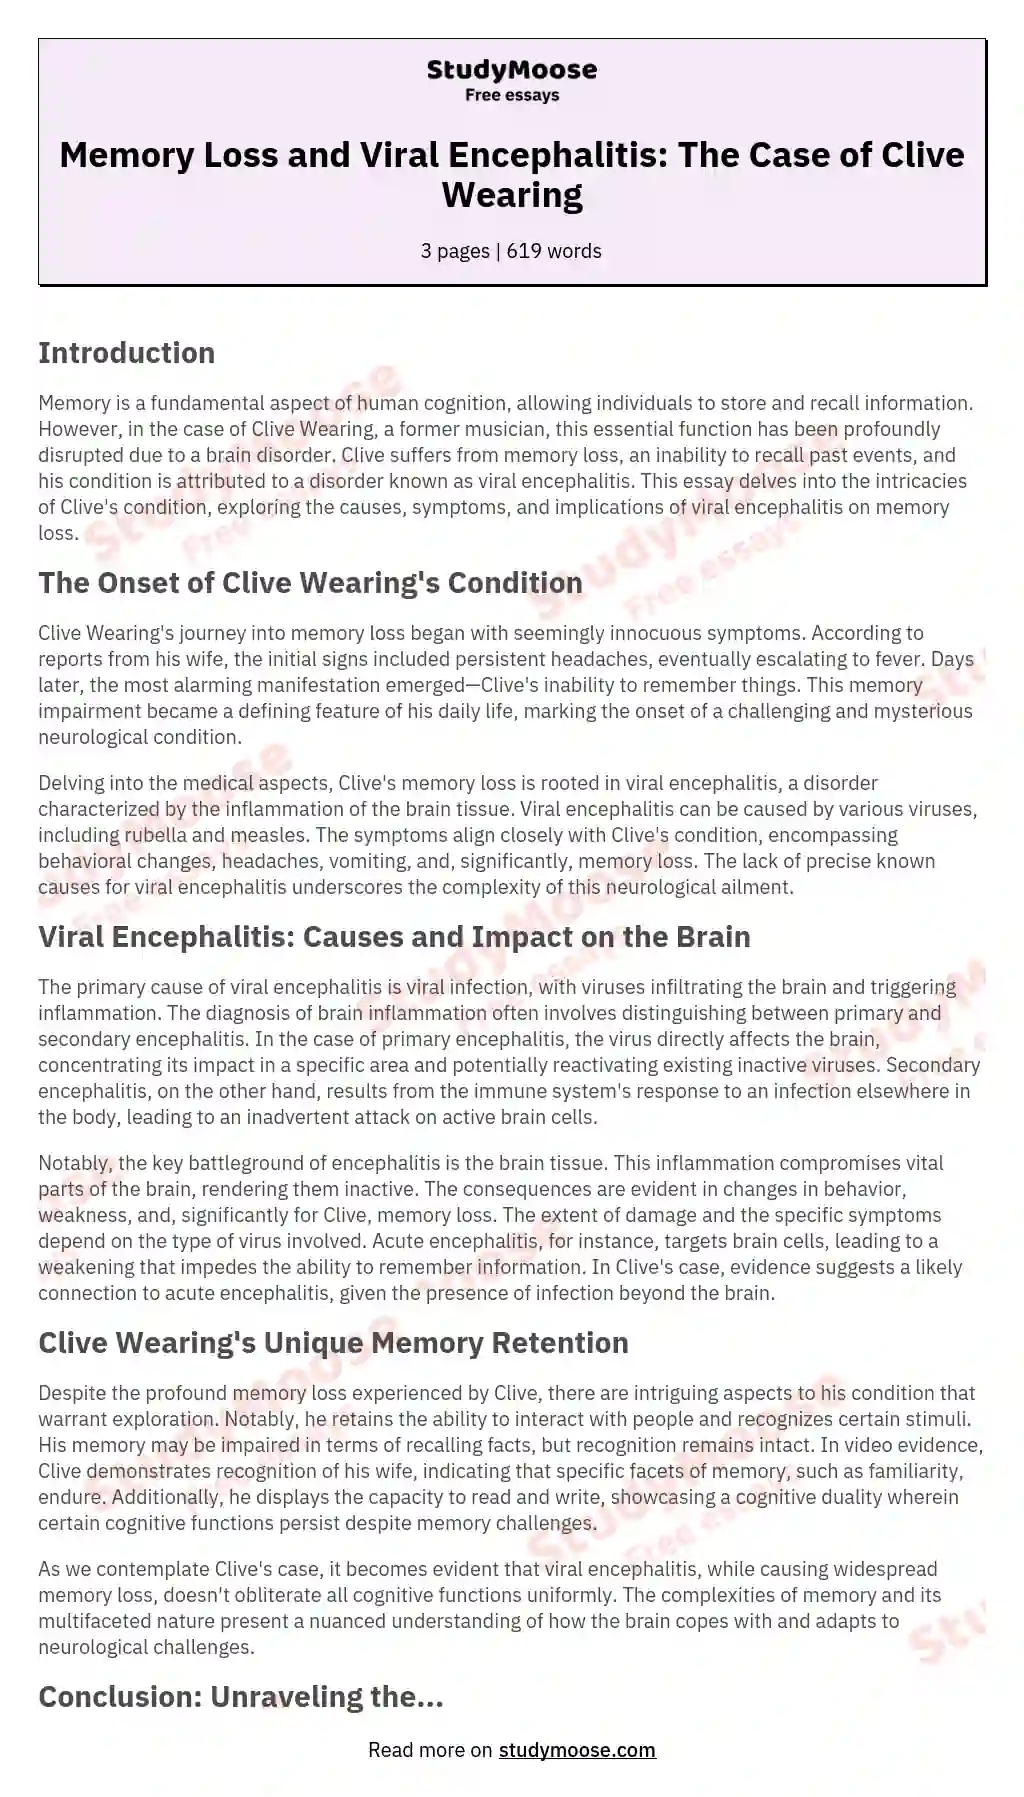 Memory Loss and Viral Encephalitis: The Case of Clive Wearing essay